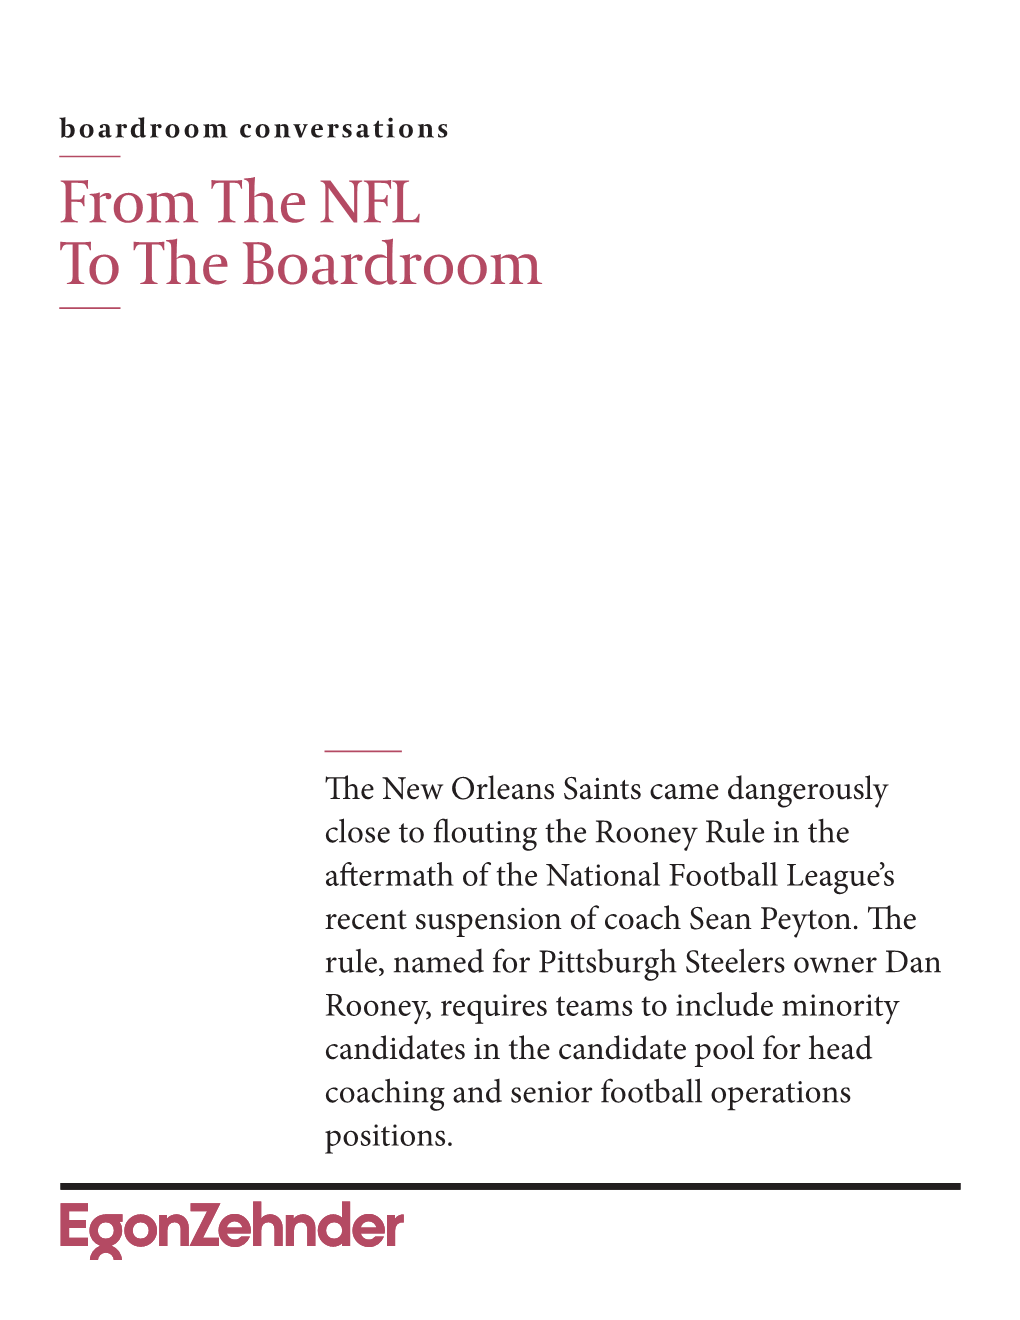 From the NFL to the Boardroom